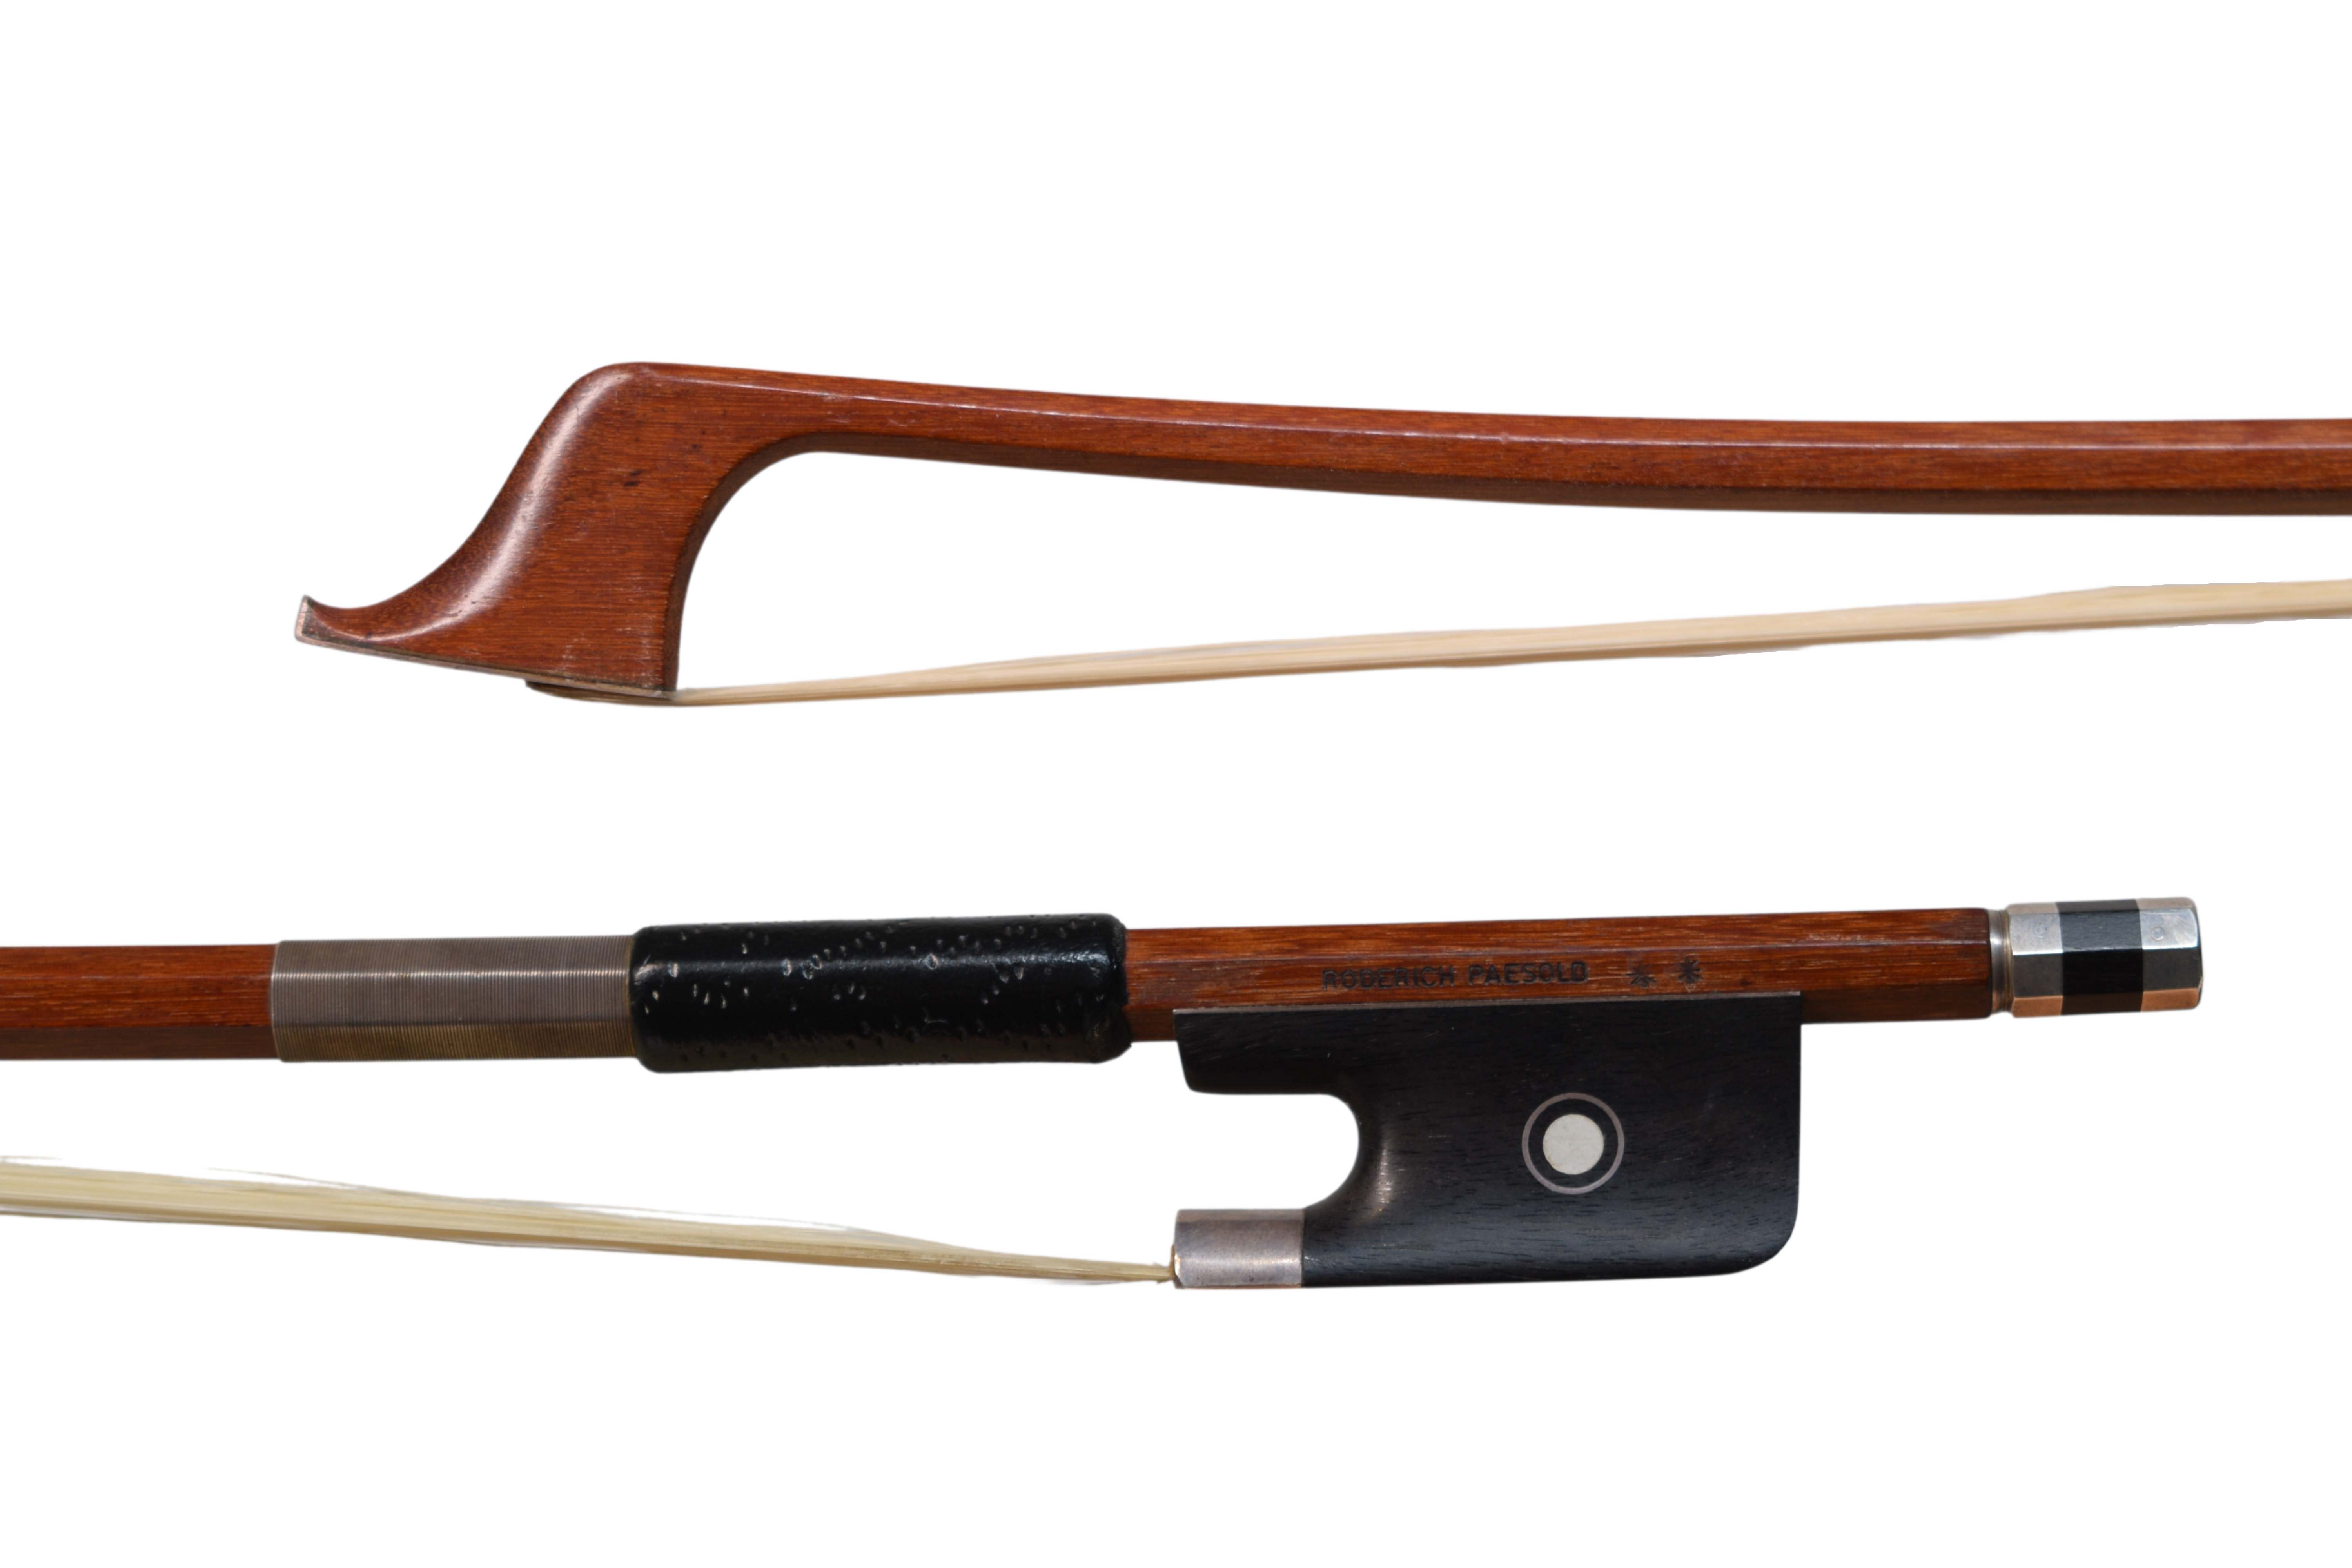 Paesold cello bow frog and head